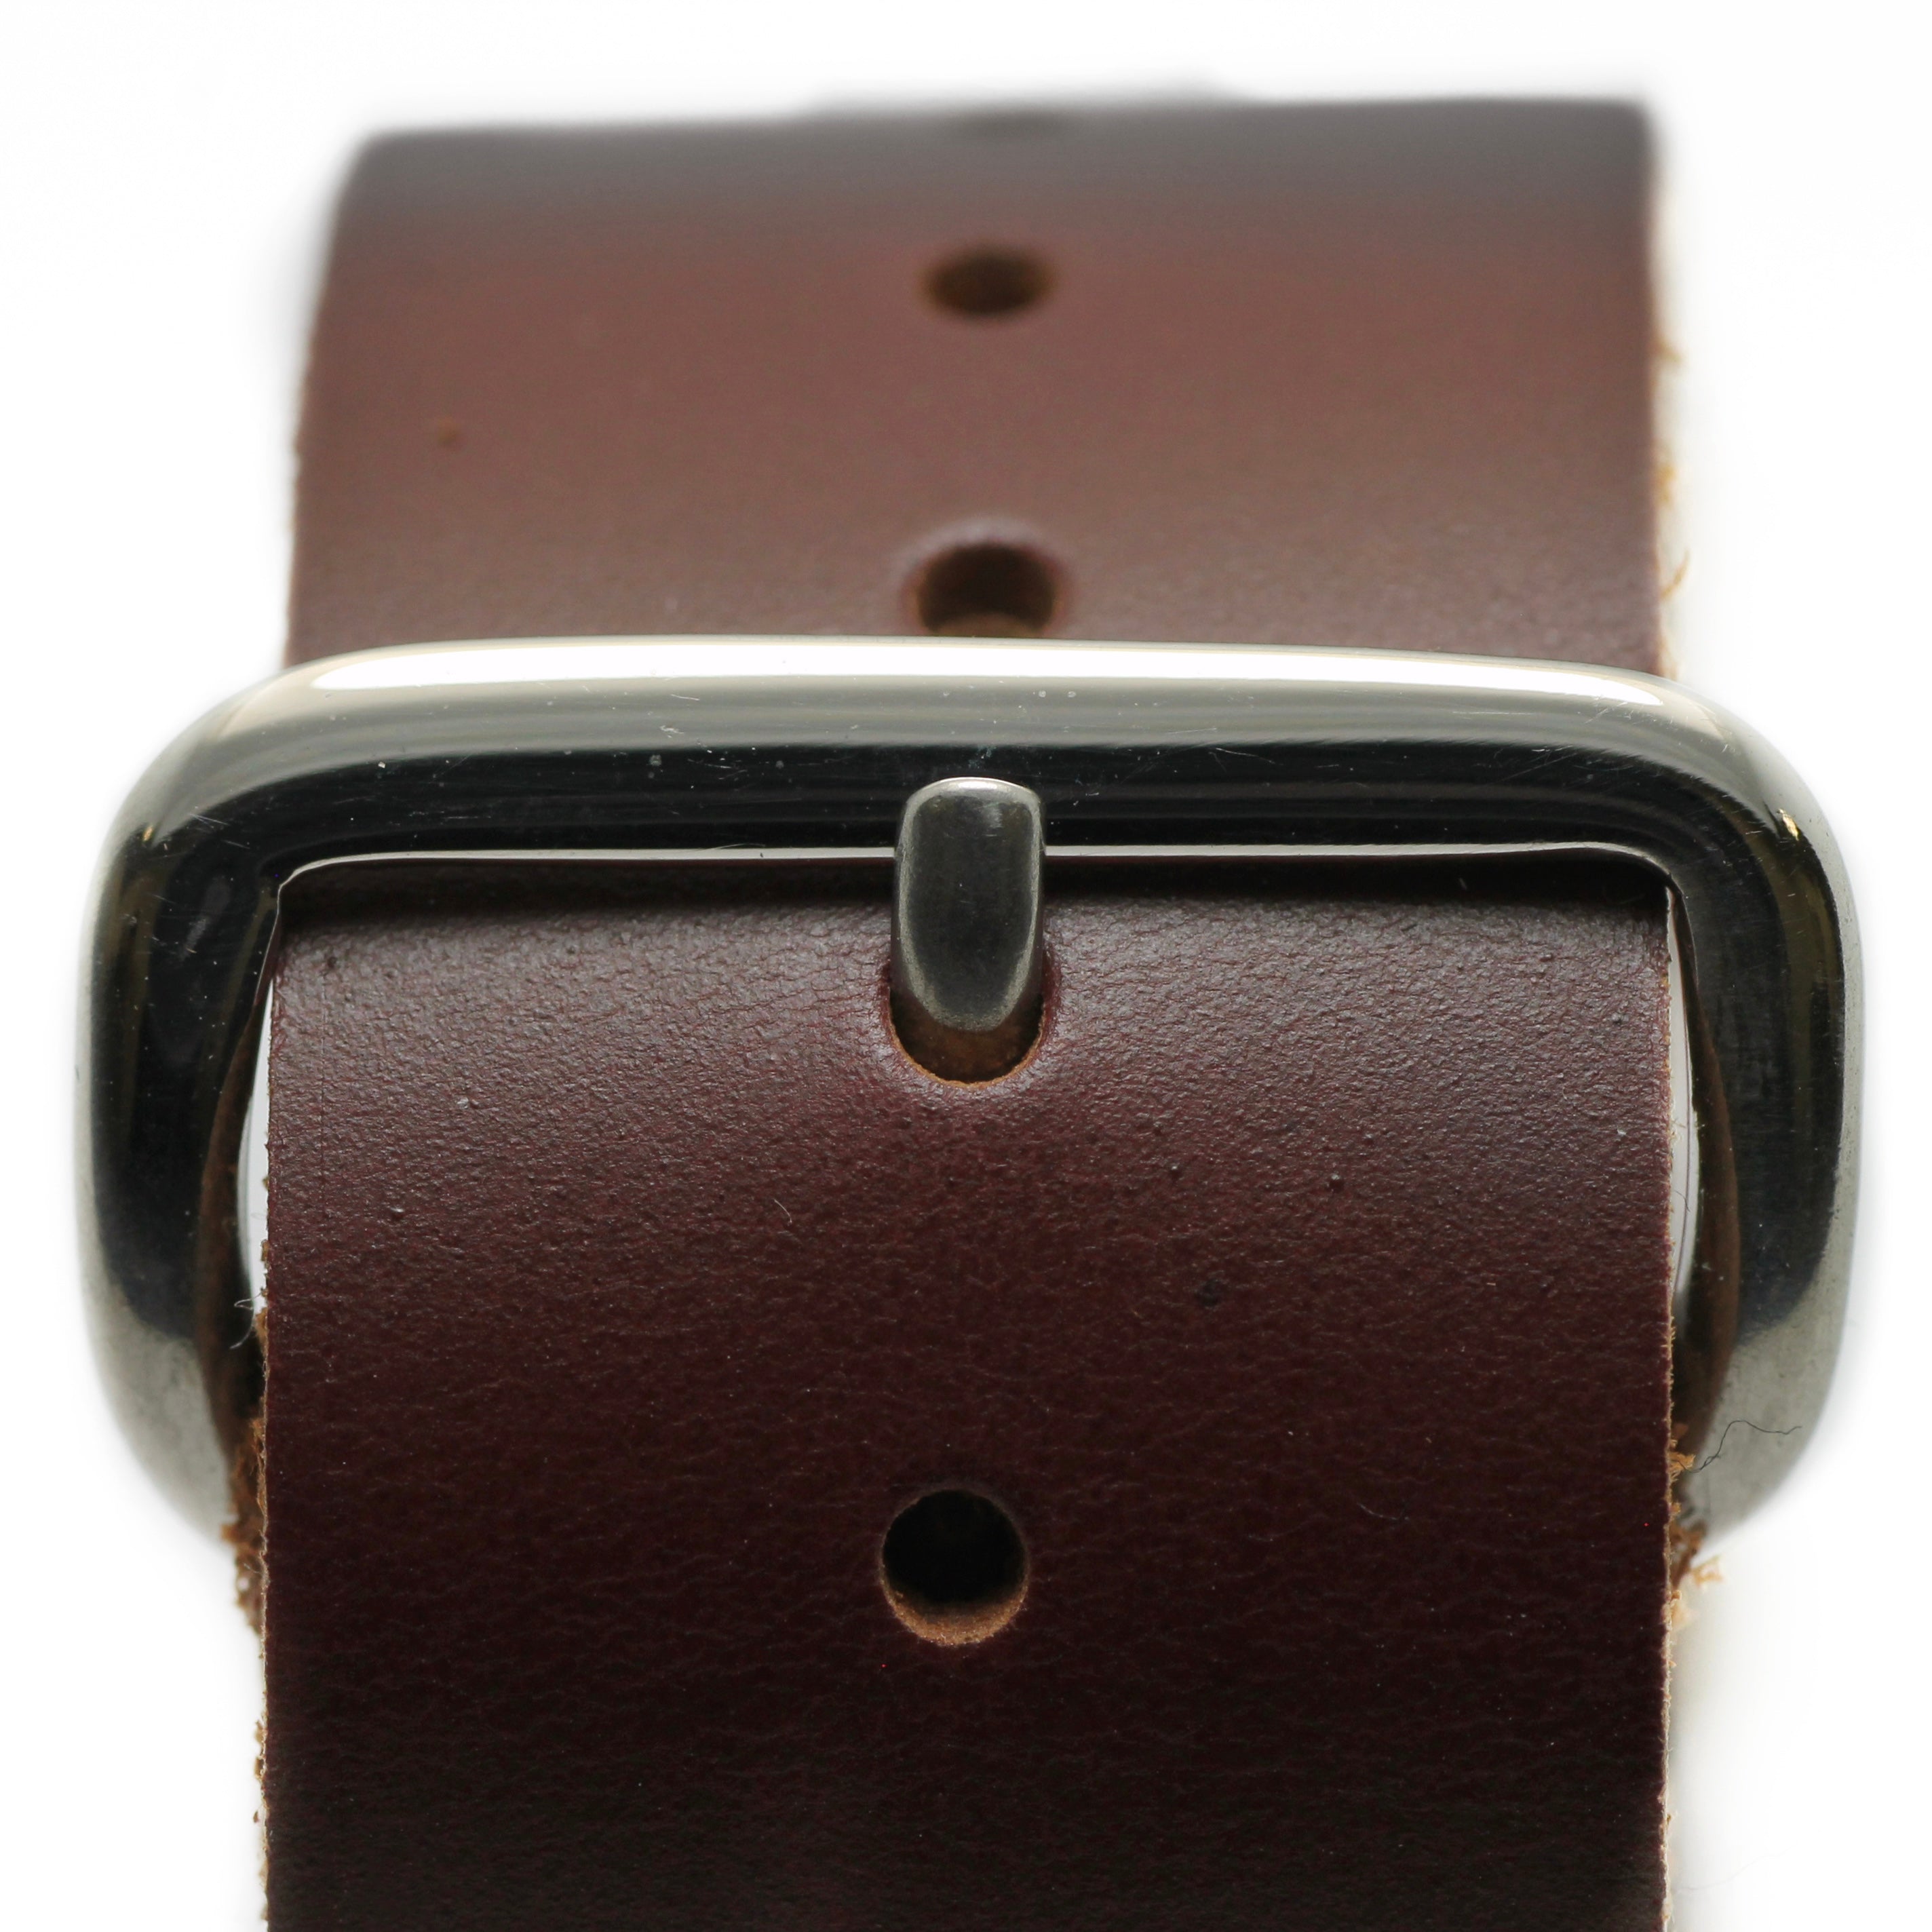 LEATHER NATO STYLE WATCH STRAP - BROWN